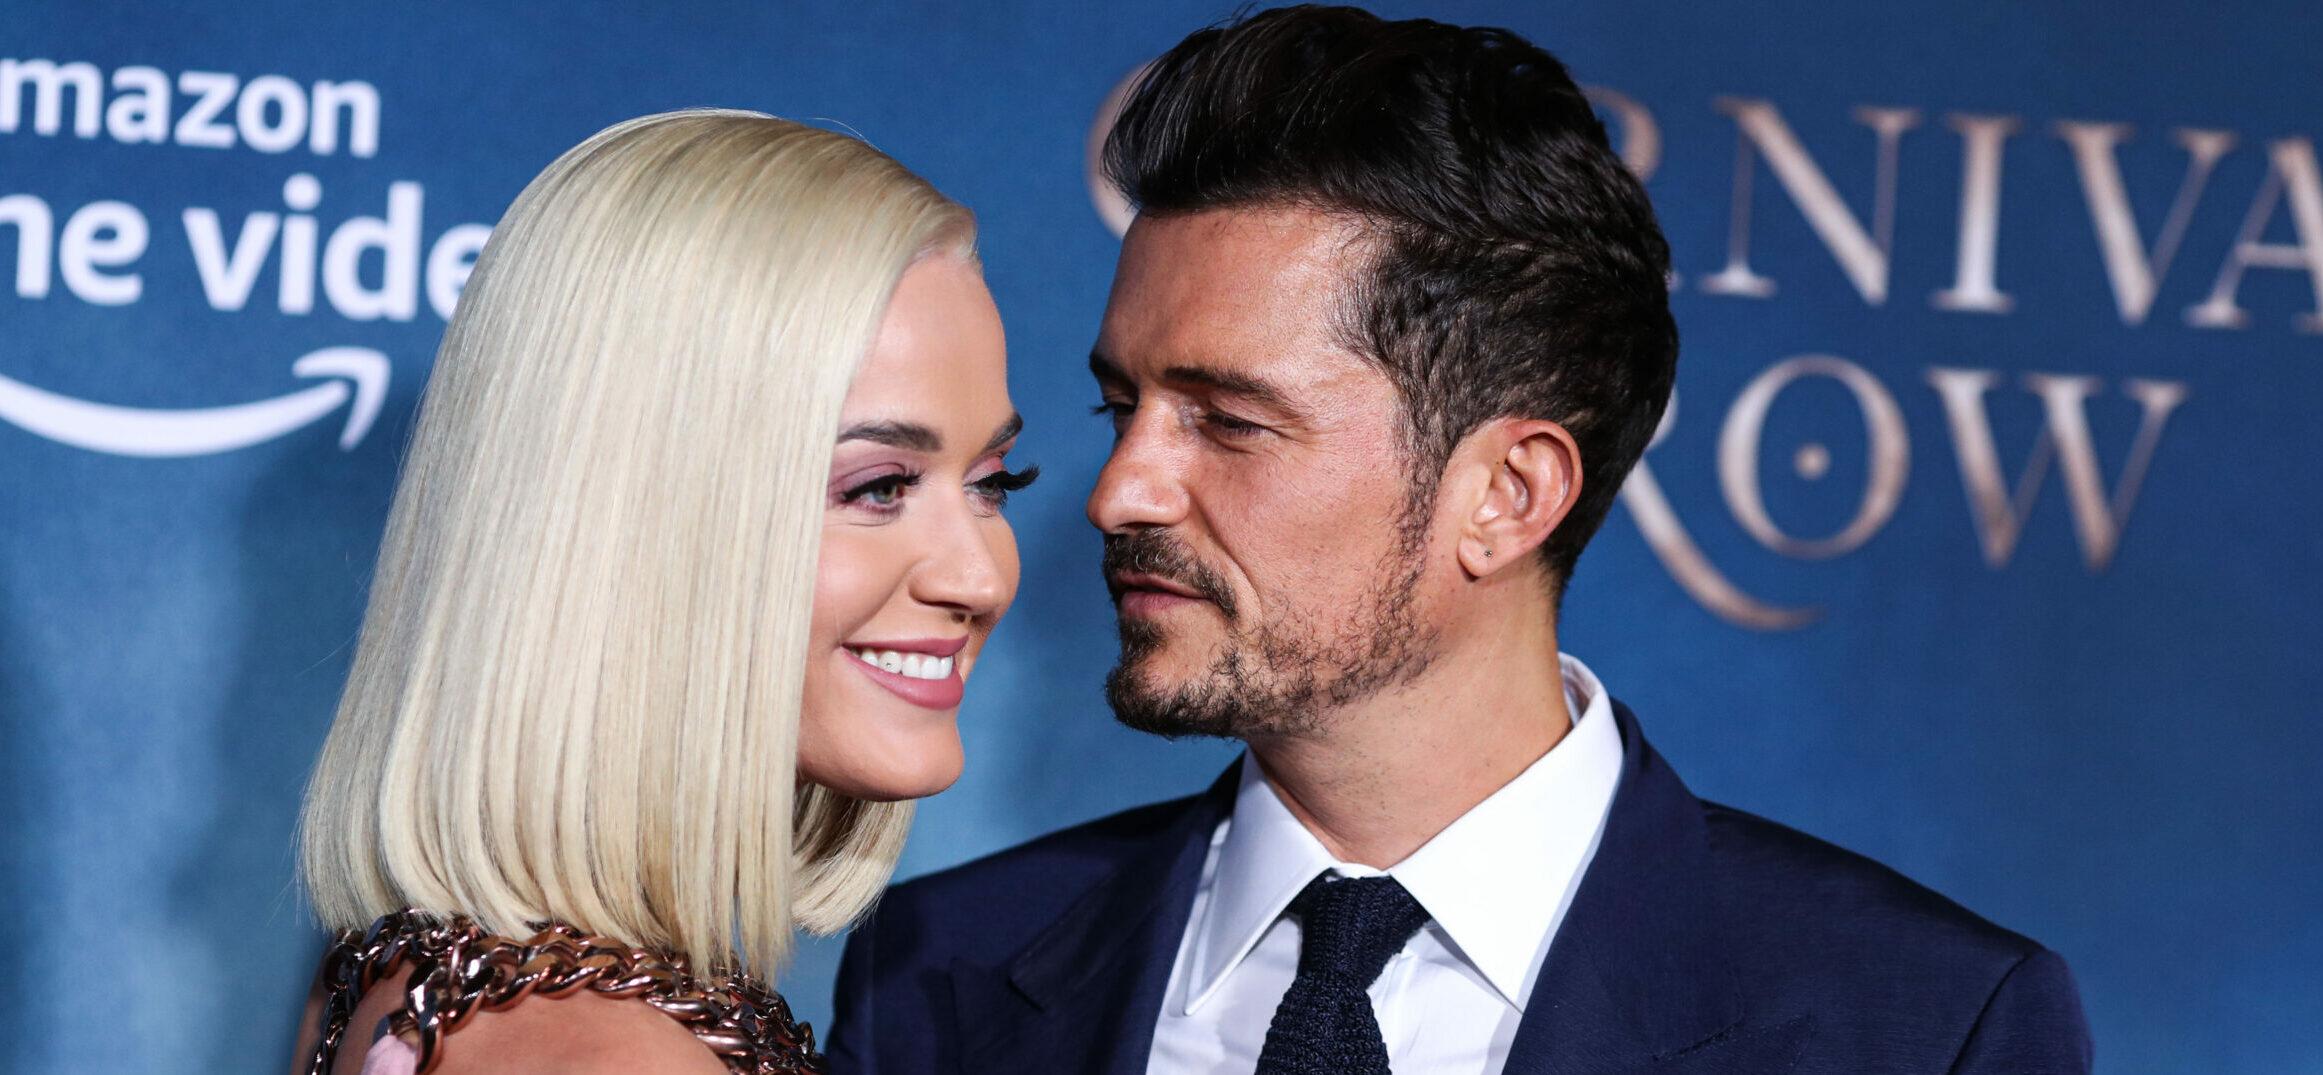 Katy Perry Makes ‘No-Alcohol’ Pact With Fiancé Orlando Bloom, Now ‘5-Weeks Sober’